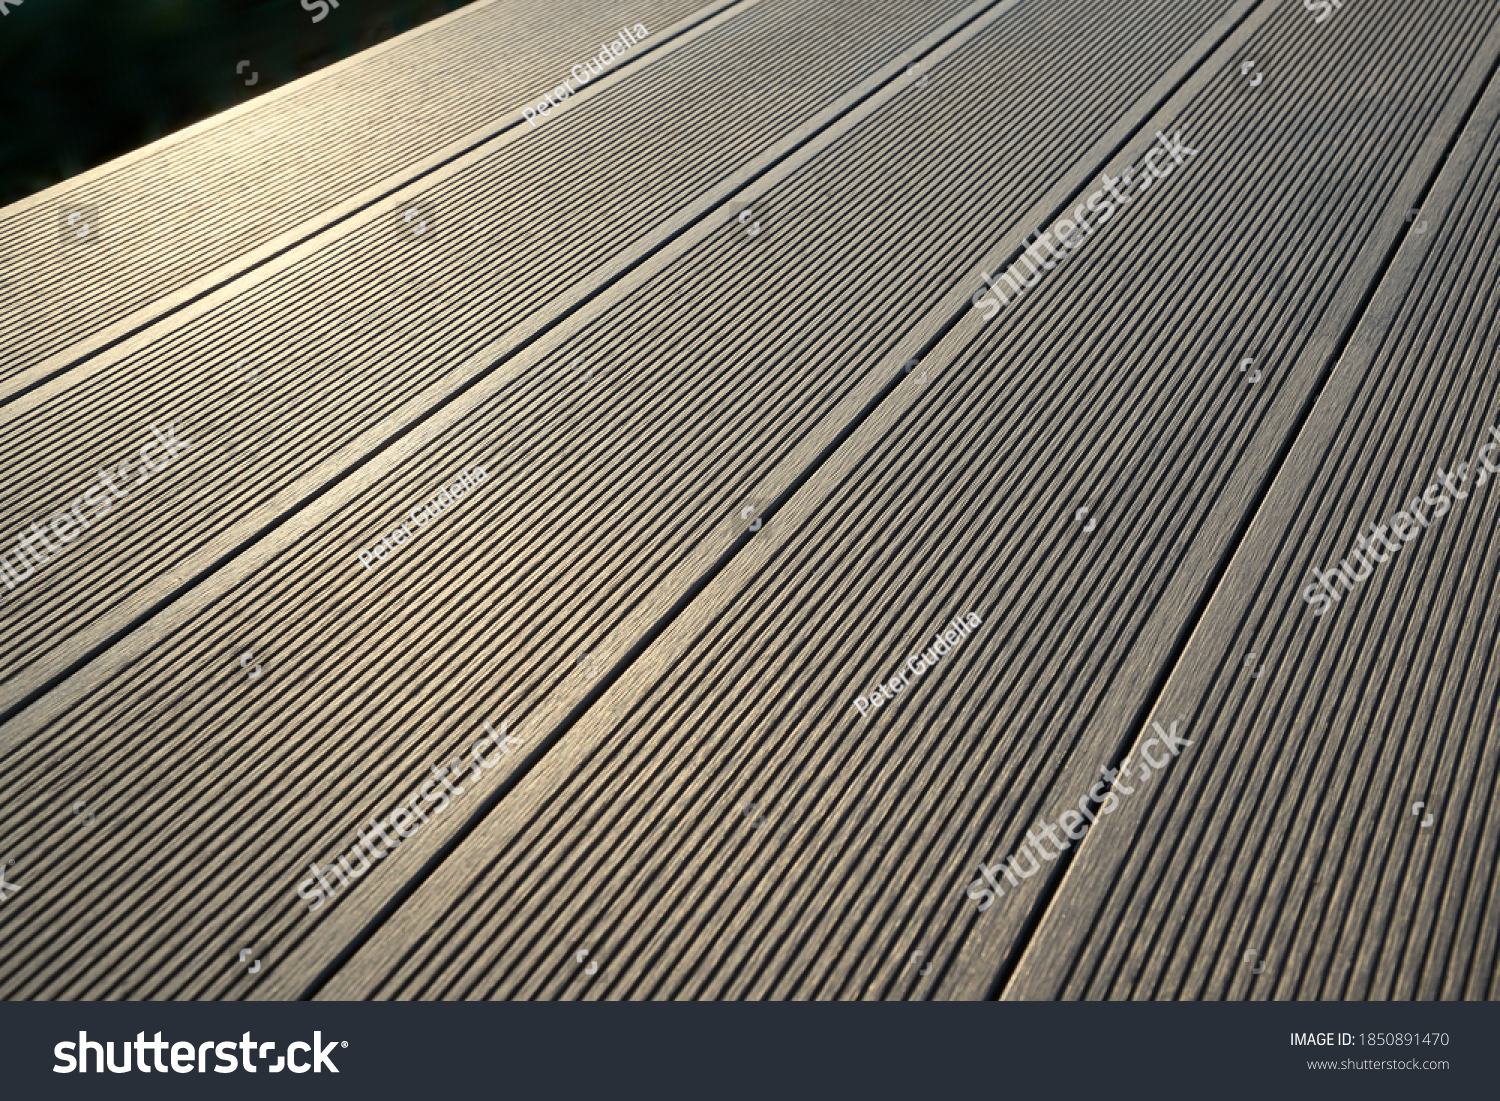 Deck planks of wpc composite material #1850891470